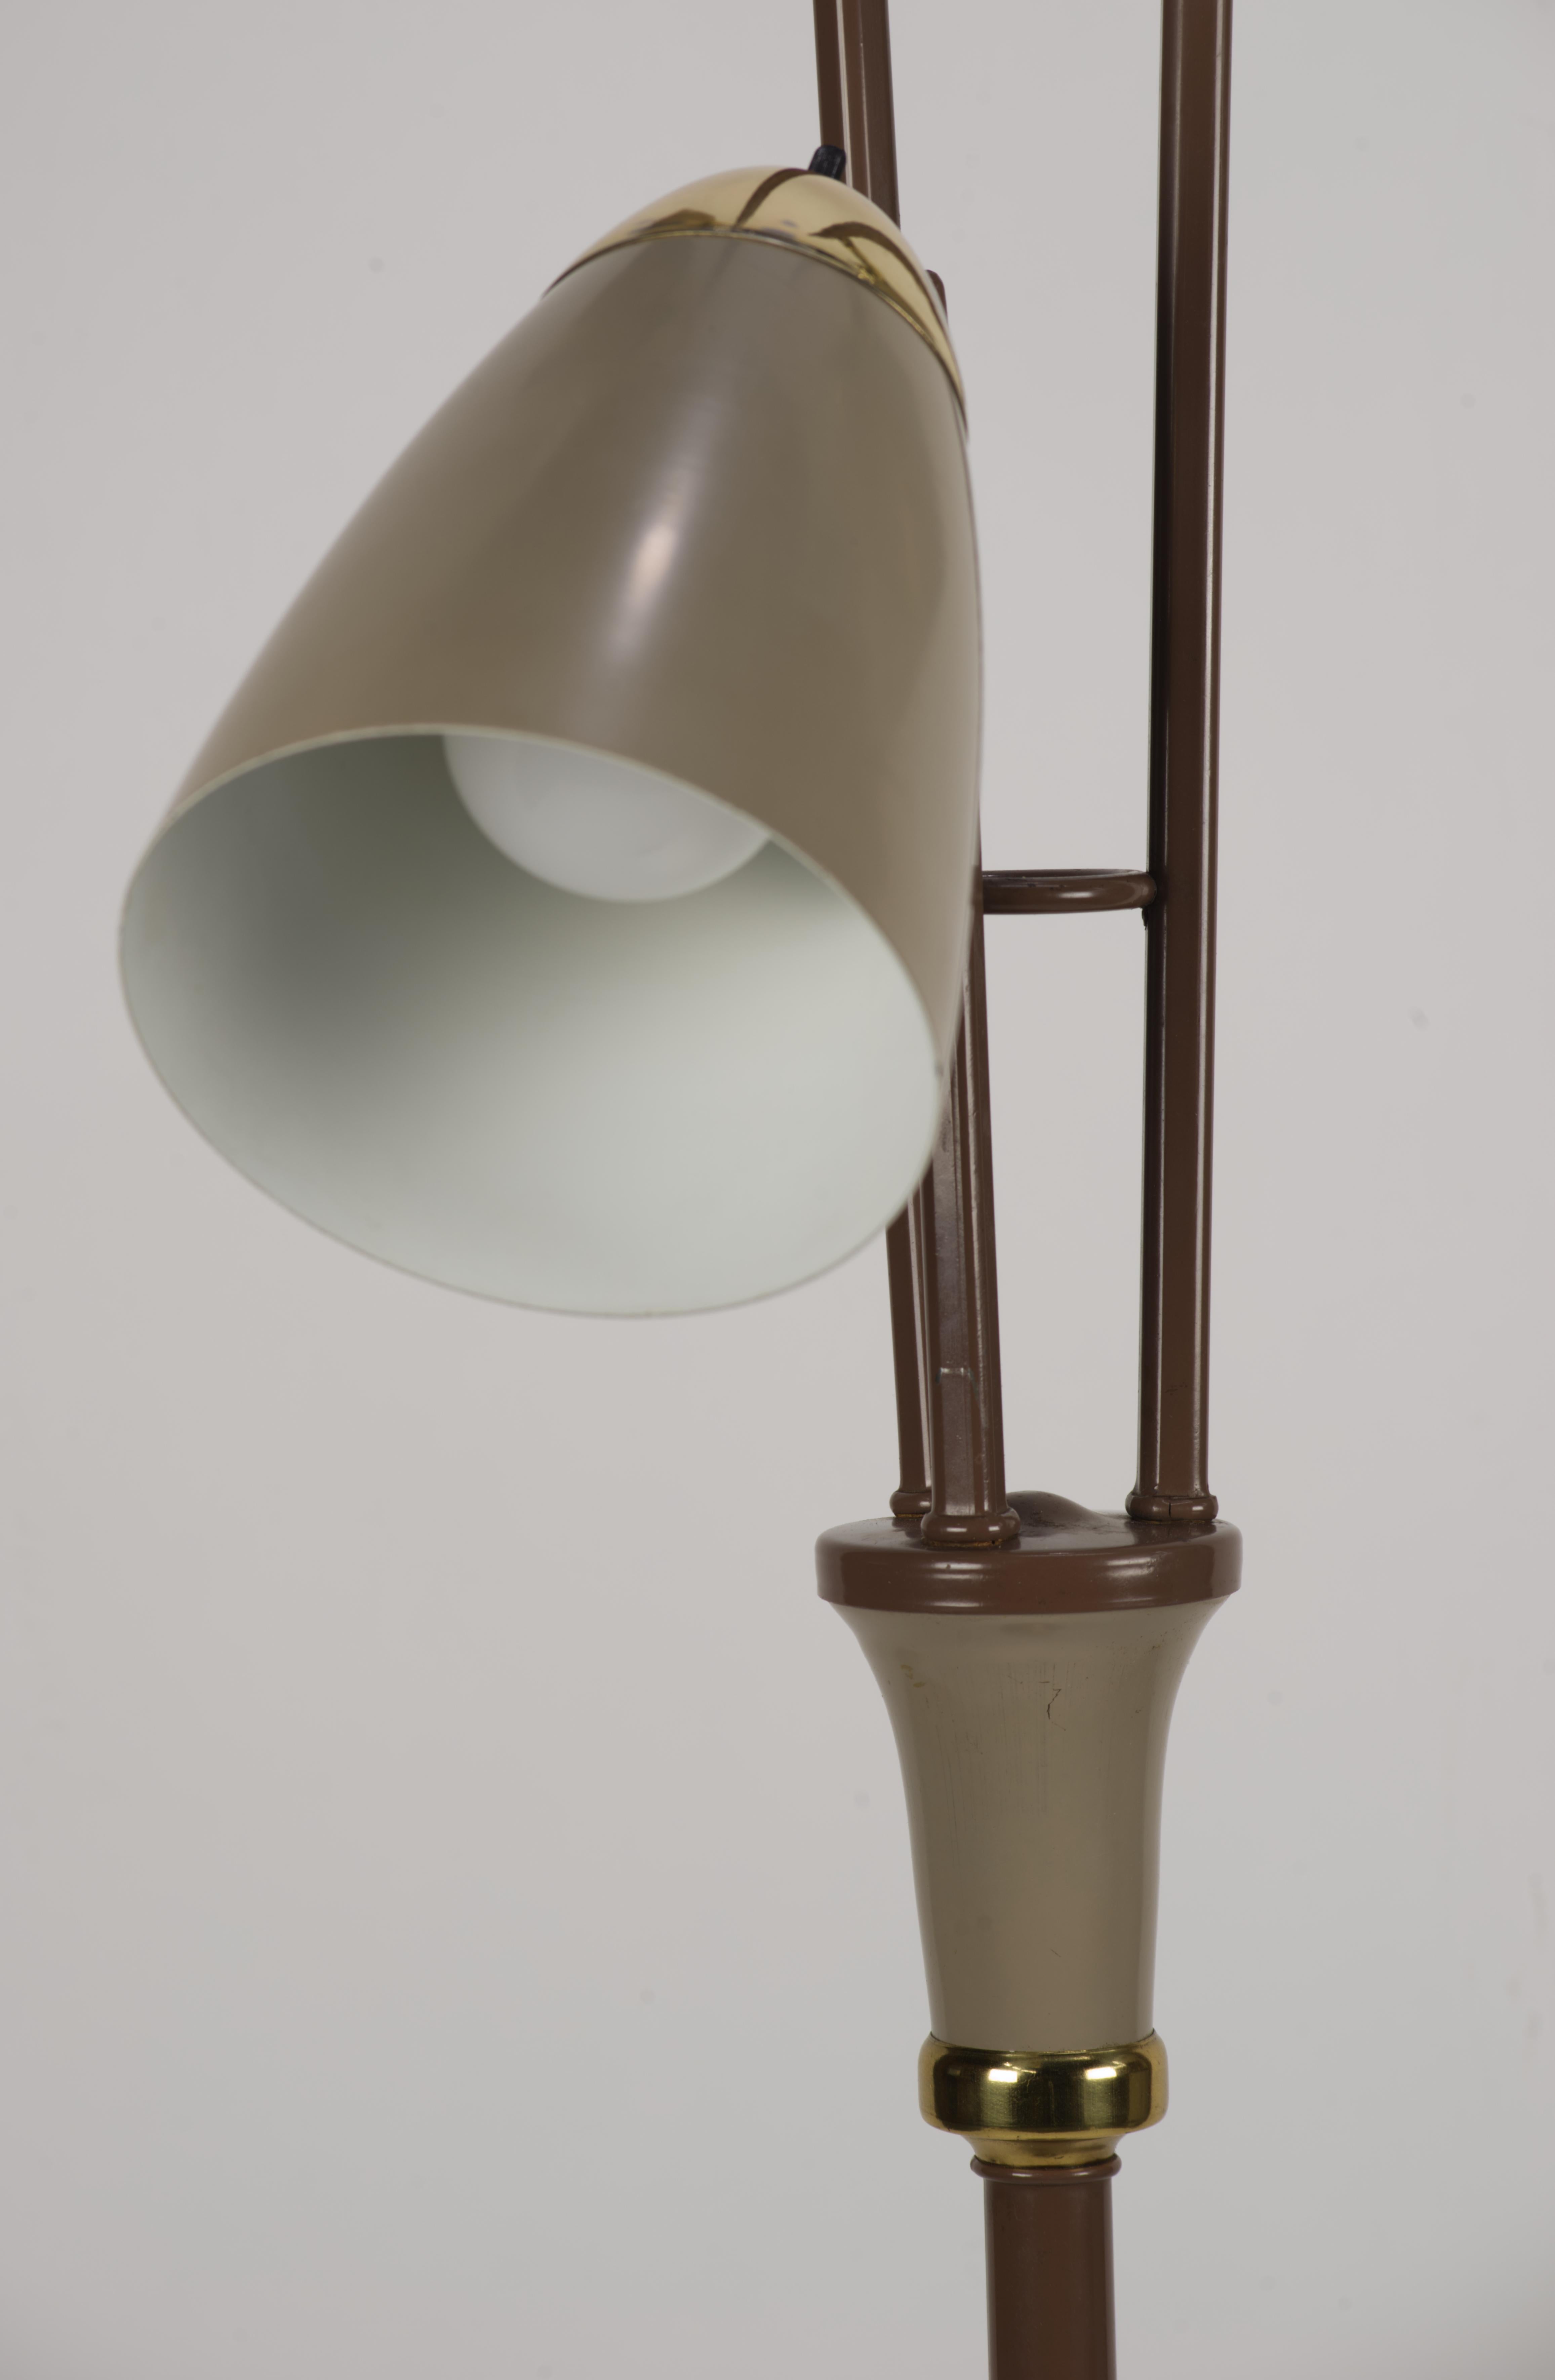  Gerald Thurston for Lightolier, Triennale Floor Lamp. 1960s  In Good Condition For Sale In Clifton Springs, NY